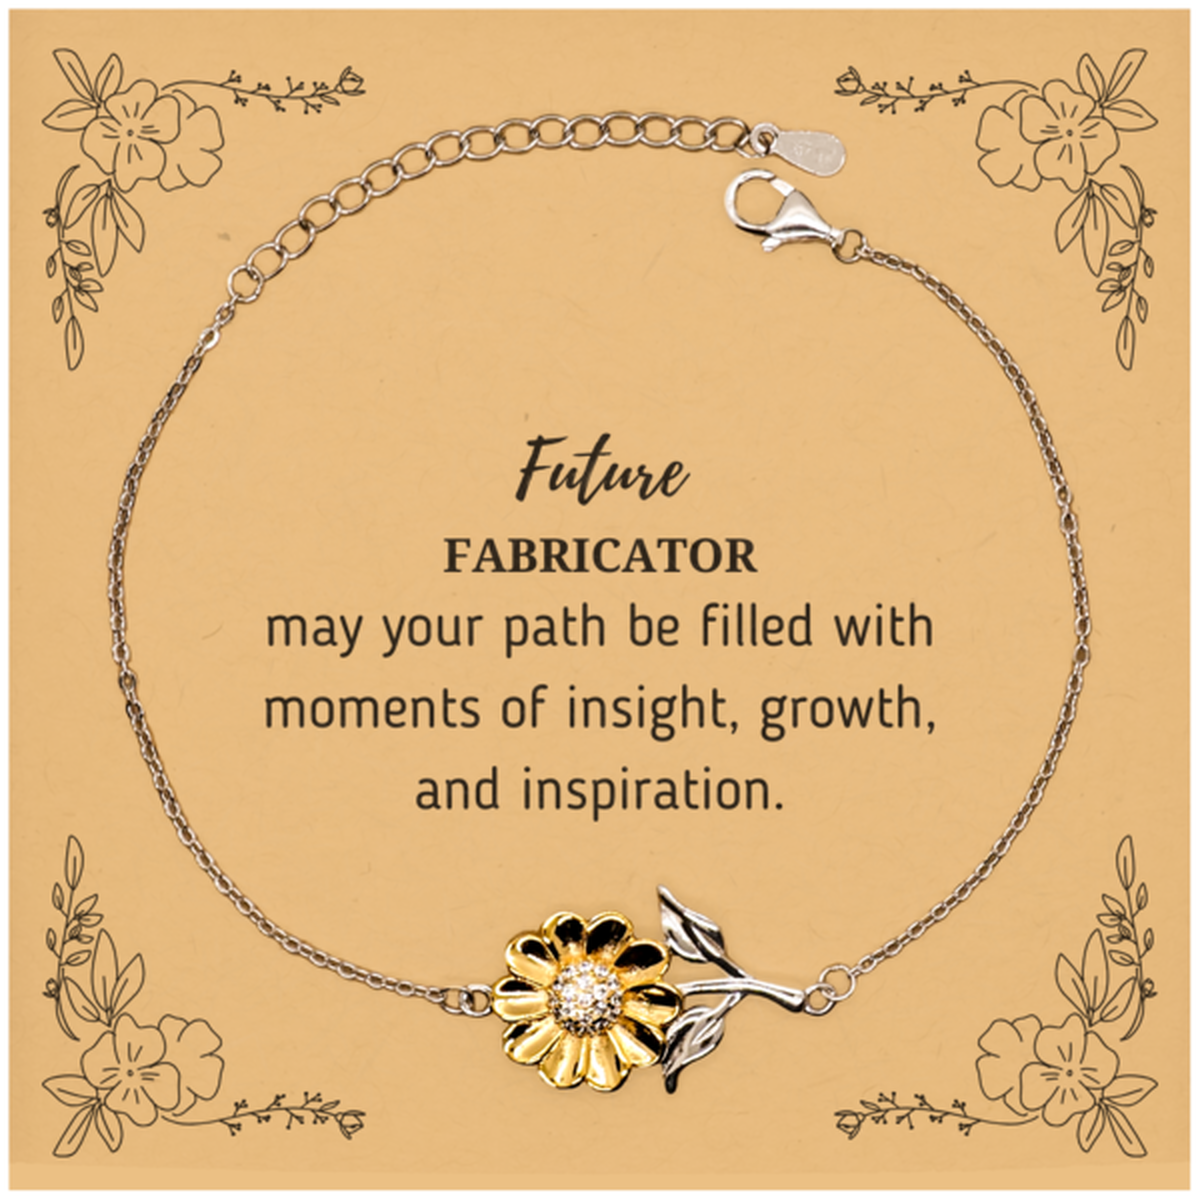 Future Fabricator Gifts, May your path be filled with moments of insight, Graduation Gifts for New Fabricator, Christmas Unique Sunflower Bracelet For Men, Women, Friends